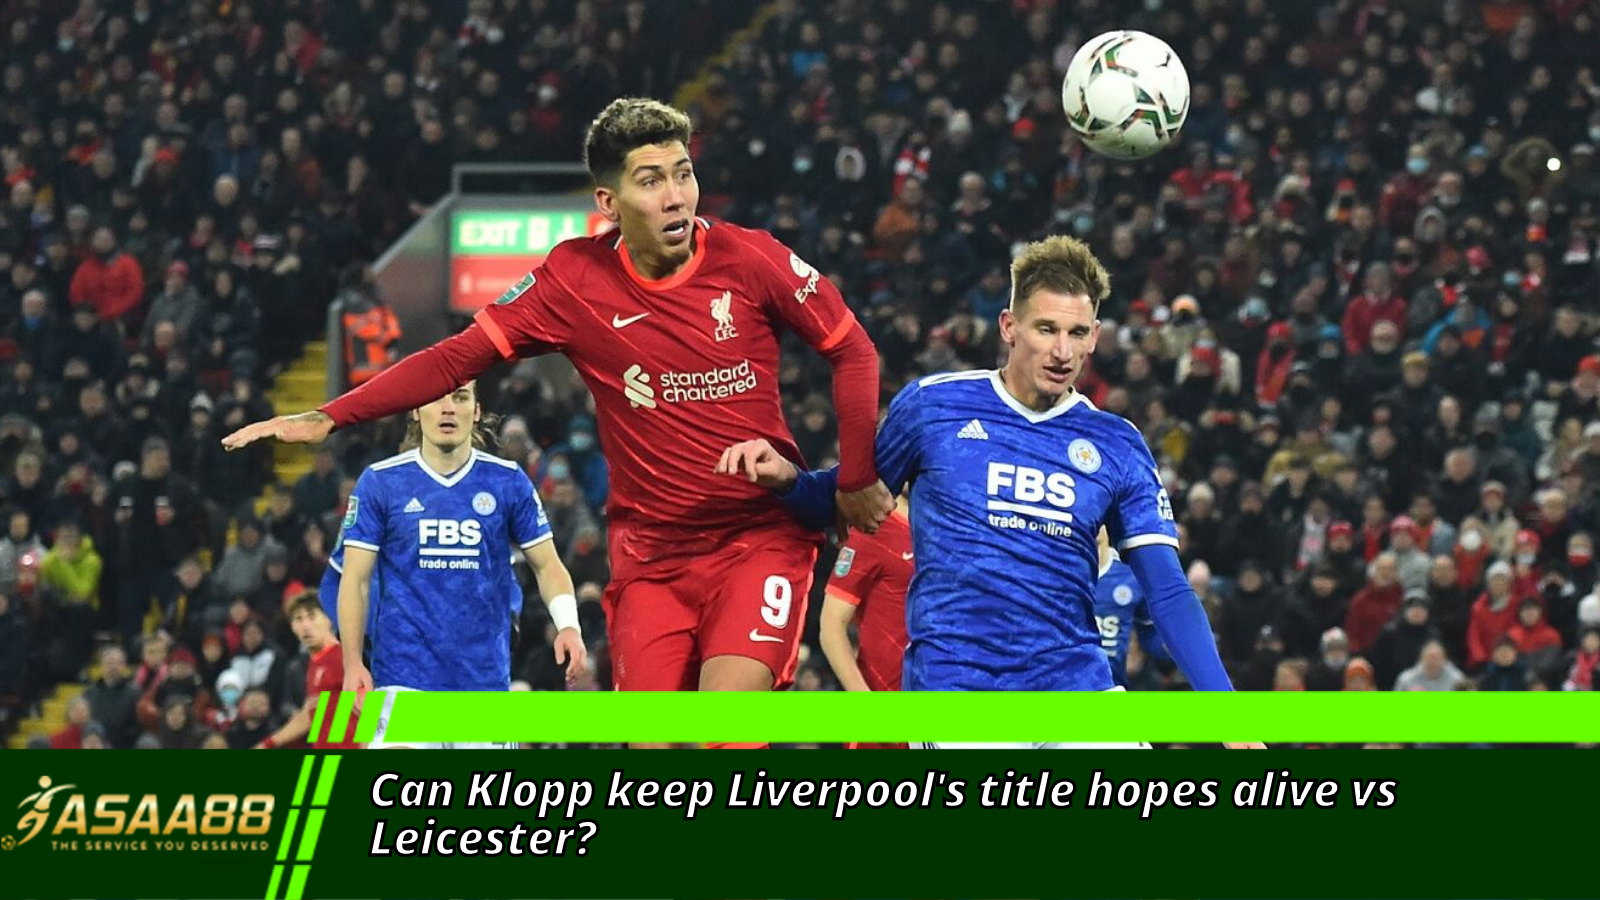 Can Klopp keep Liverpool's title hopes alive vs Leicester?